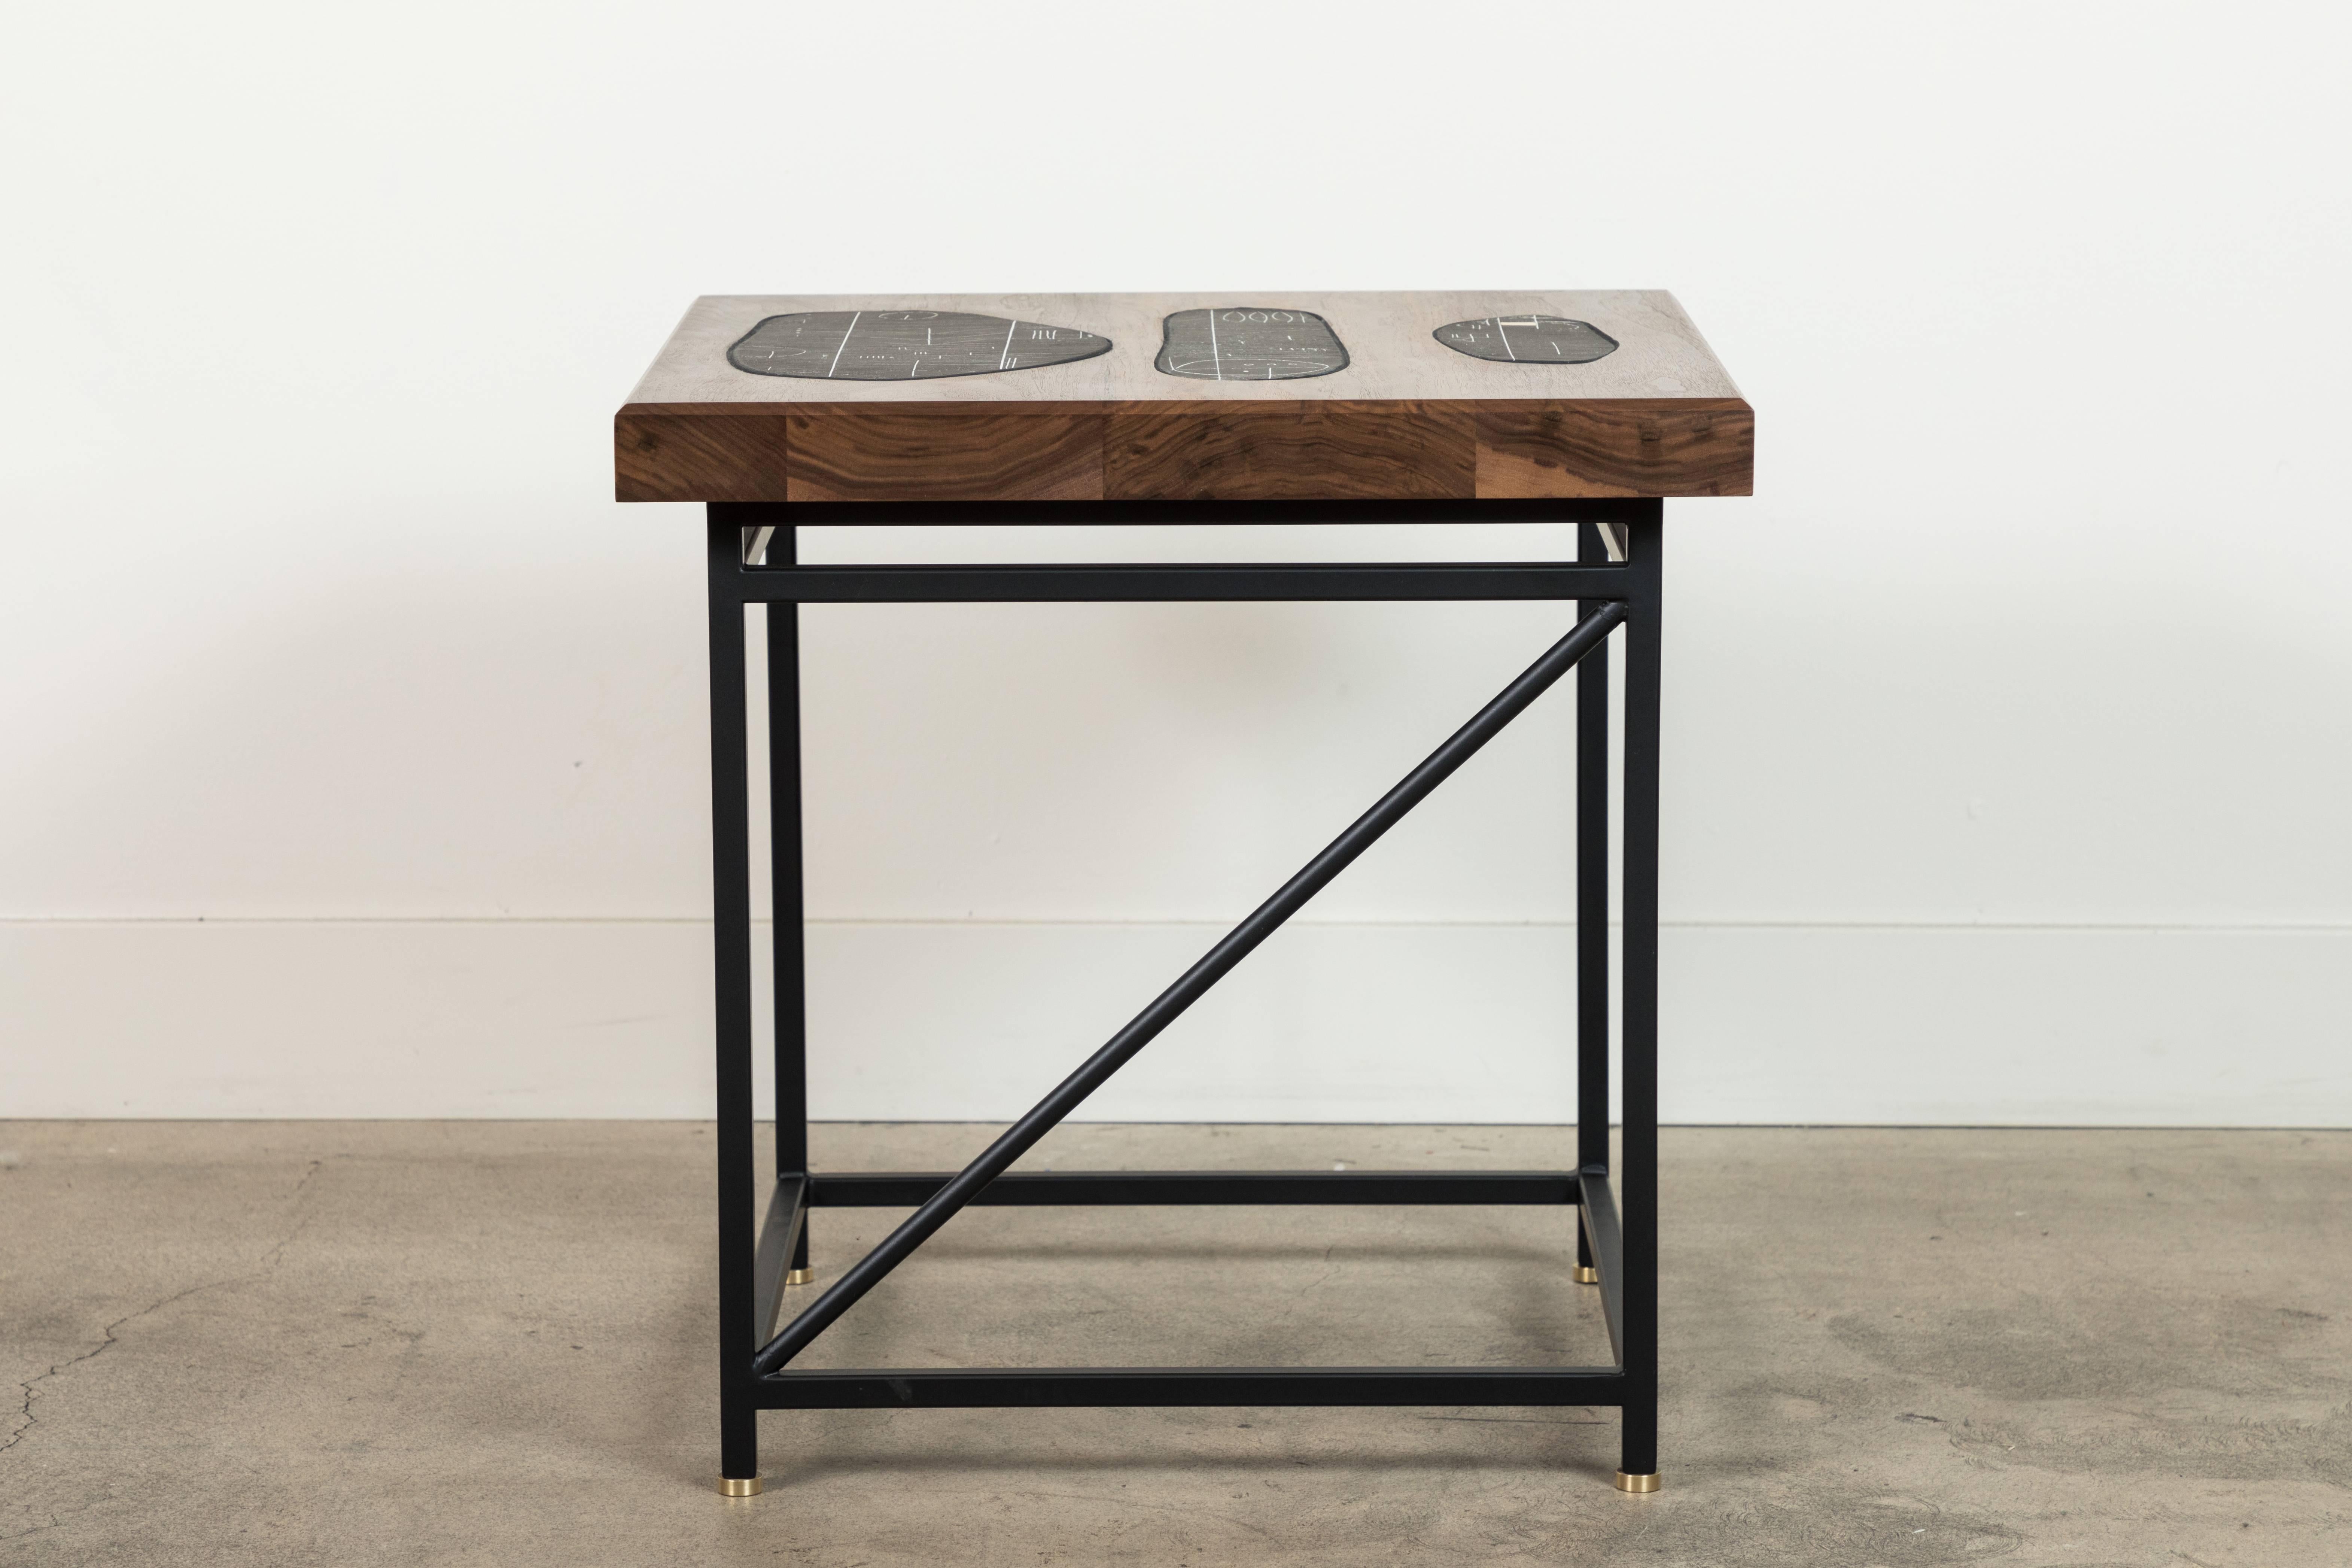 Contemporary Solid Walnut and Ceramic Side Table by Heather Rosenman for Collabs in Clay